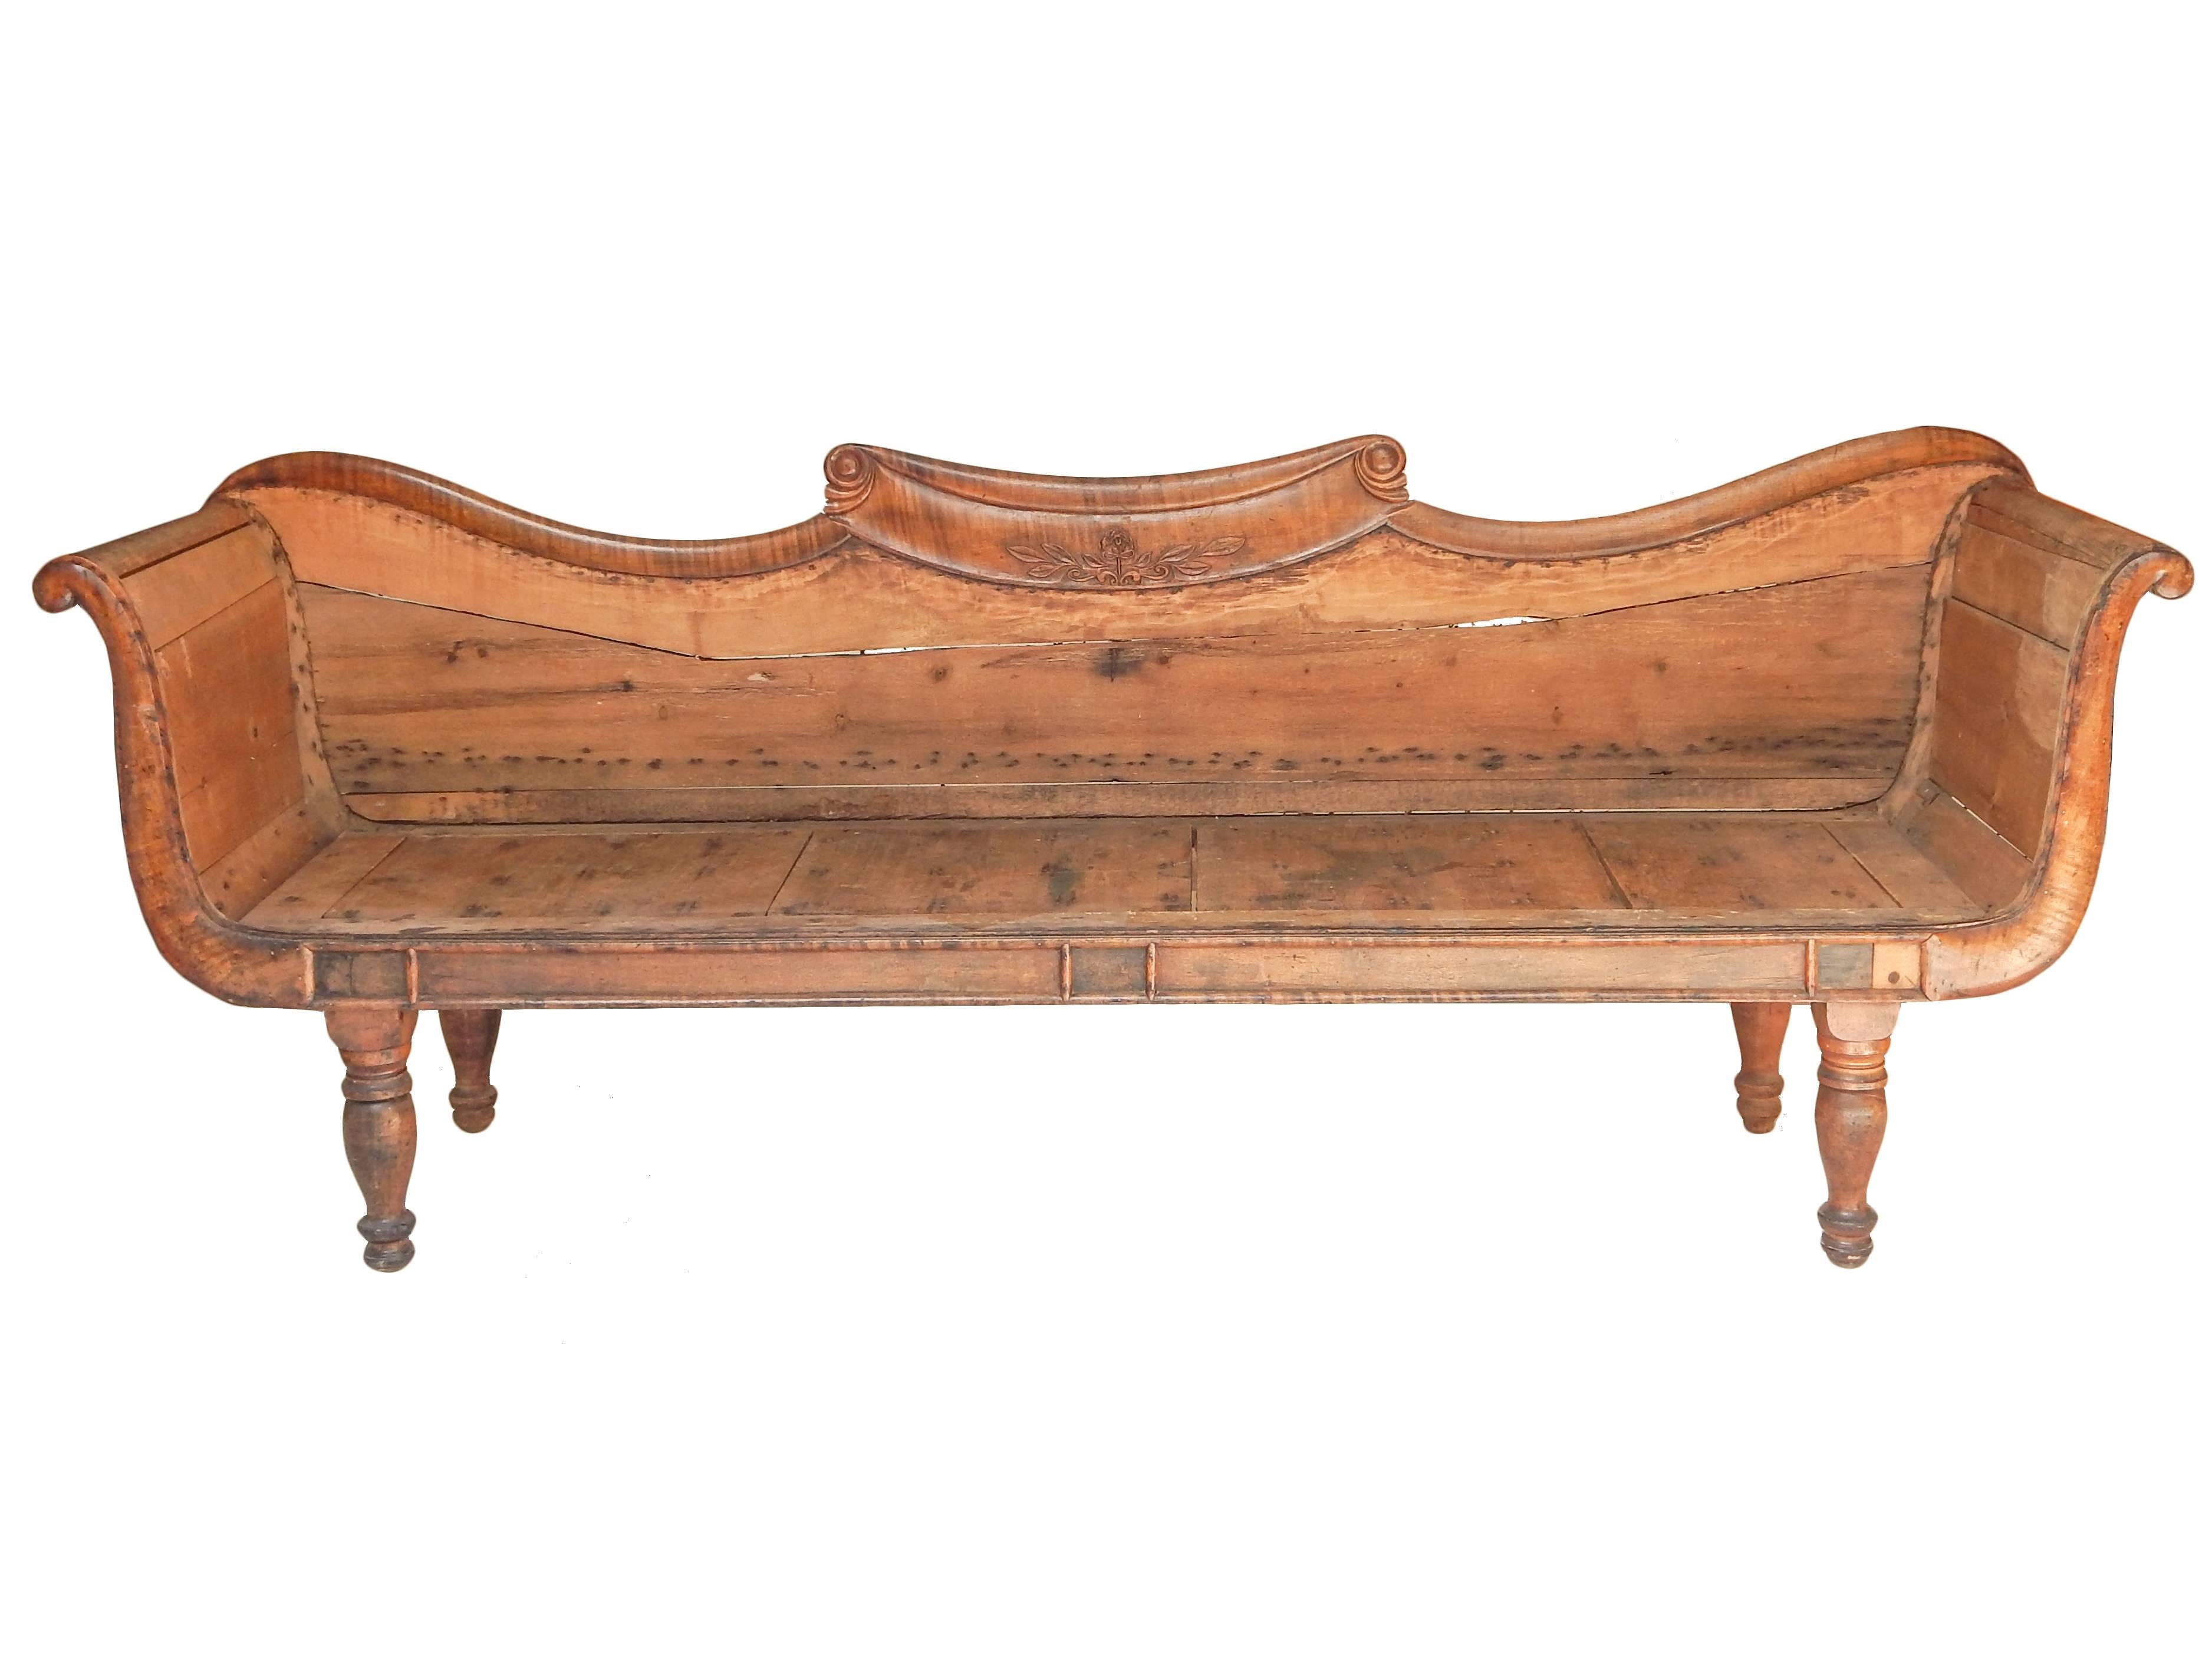 Early New England federal style sofa frame from the personal collection of the late Nan Gurley.
Would look sensational with just a French mattress or completely re-upholstered.
Measures: Seat height: 14